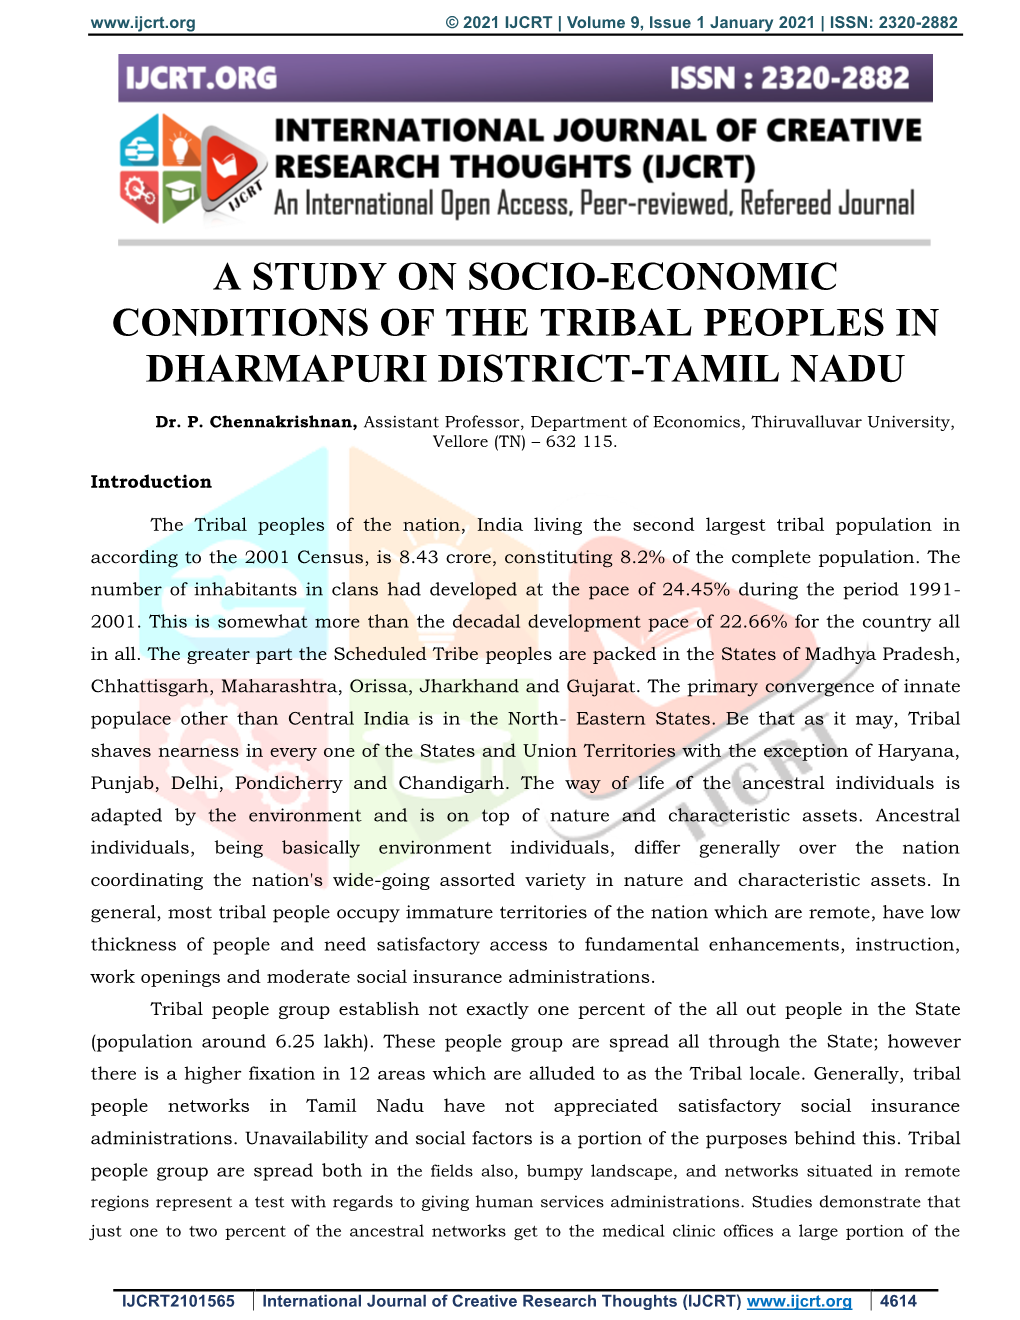 A Study on Socio-Economic Conditions of the Tribal Peoples in Dharmapuri District-Tamil Nadu